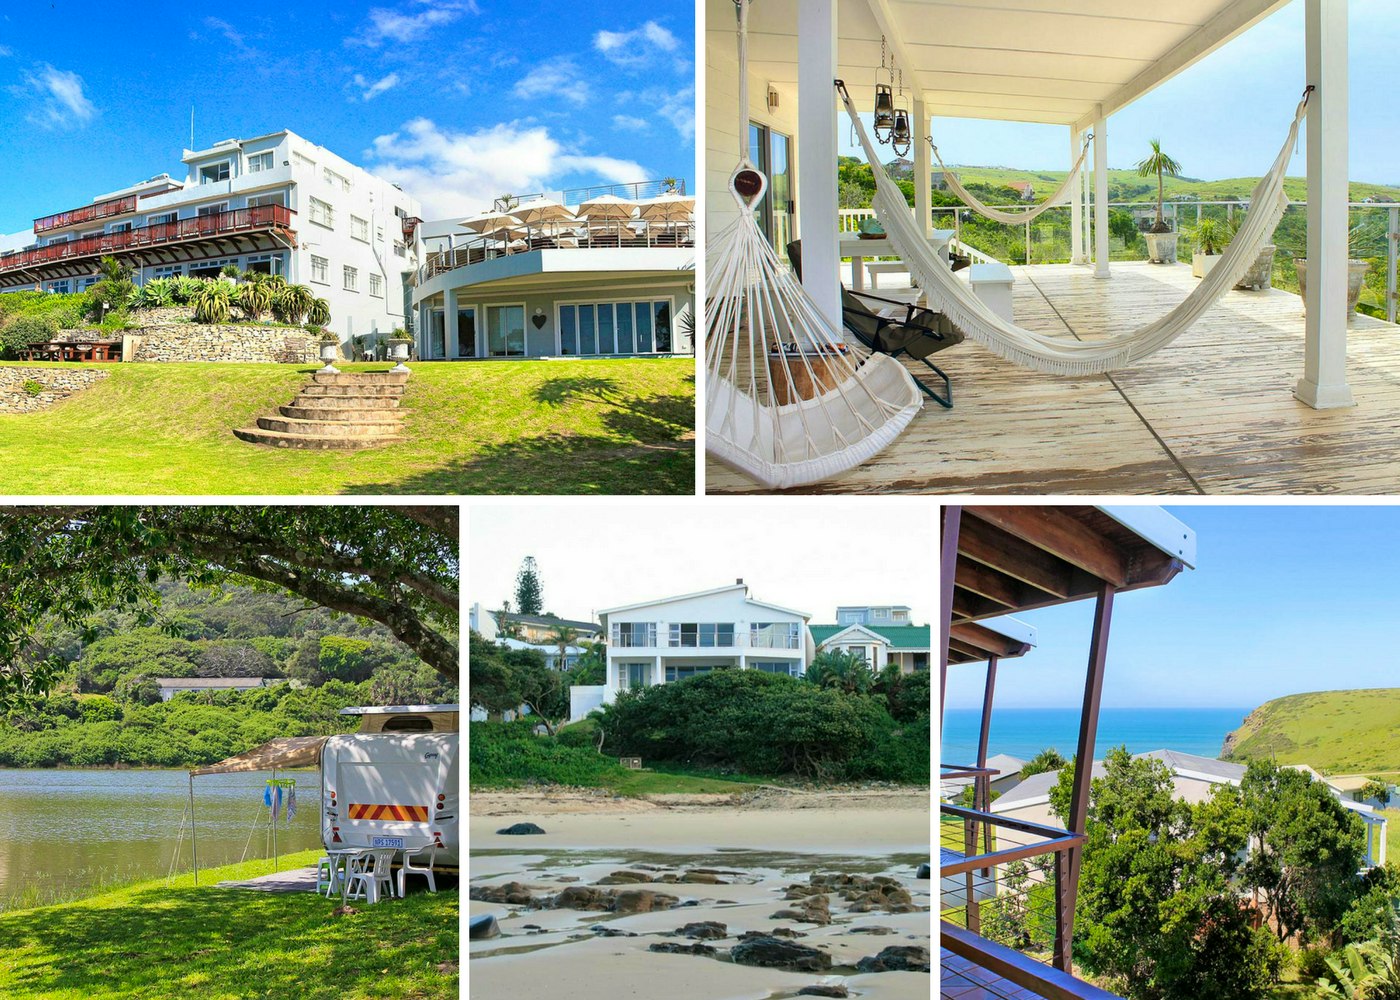 Top left: Morgan Bay Hotel, Top right: The Sullies, Bottom left: Morgan Bay Caravan Park, Bottom middle: Seaside Holiday House, Bottom right: Ocean Valley View